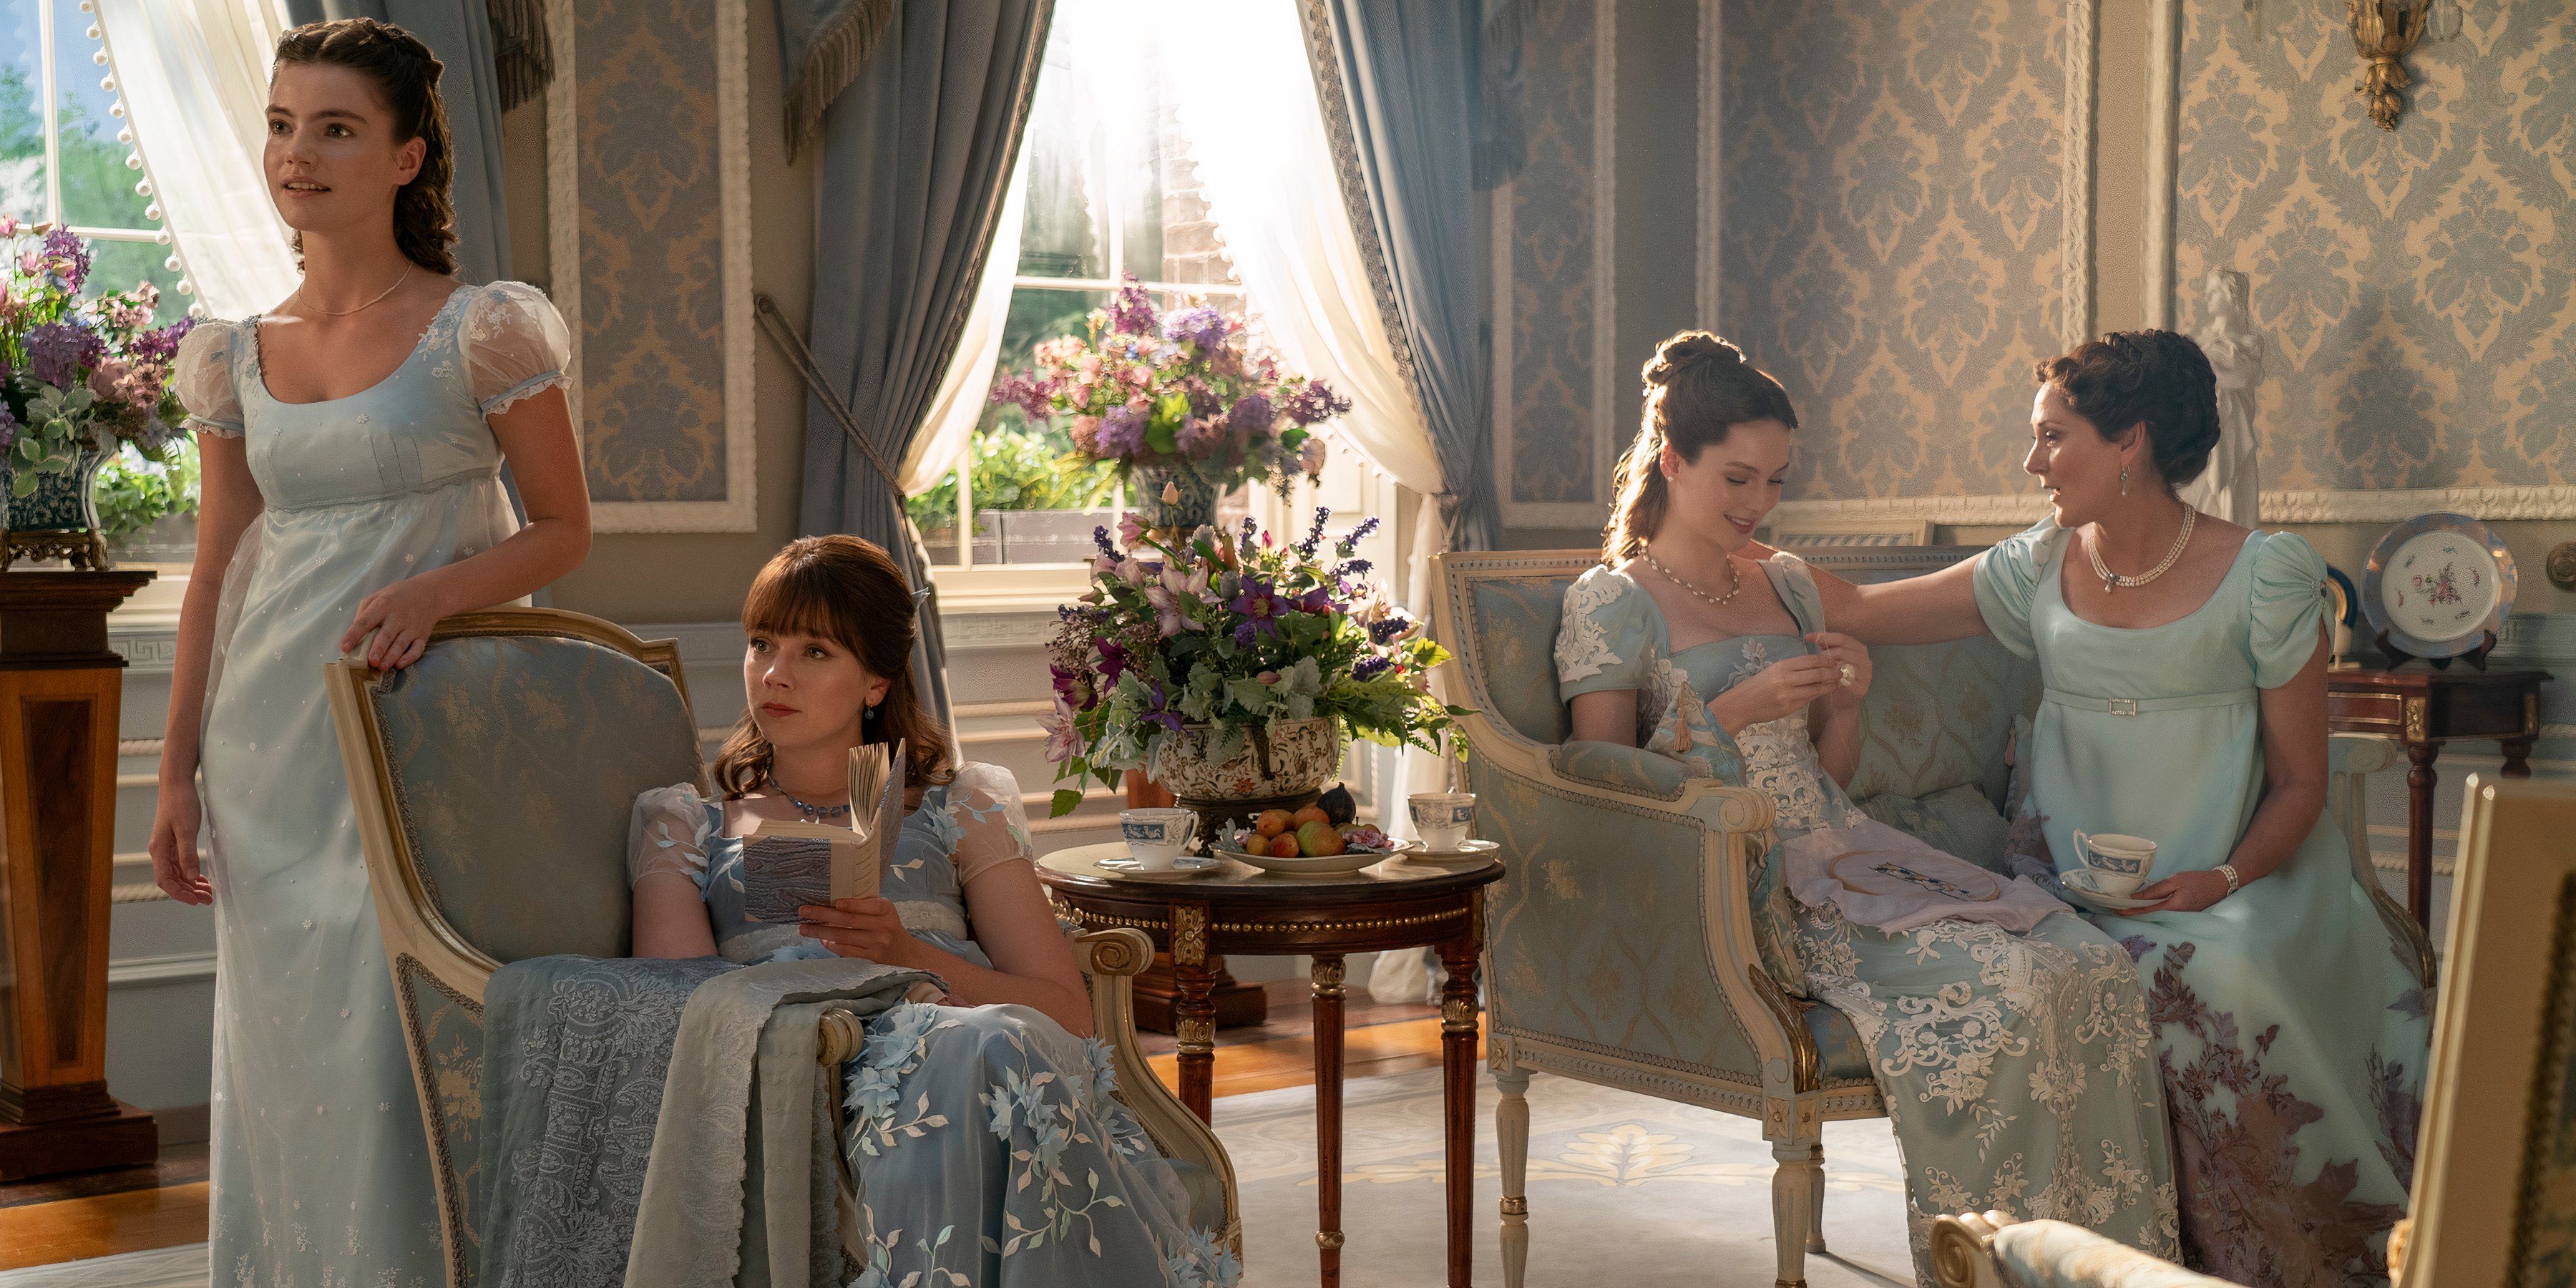 Hannah Dodd as Francesca sits with Ruth Gemmell as Violet, Claudia Jessie as Eloise and Florence Hunt as Hyacinth in Bridgerton season 3 still